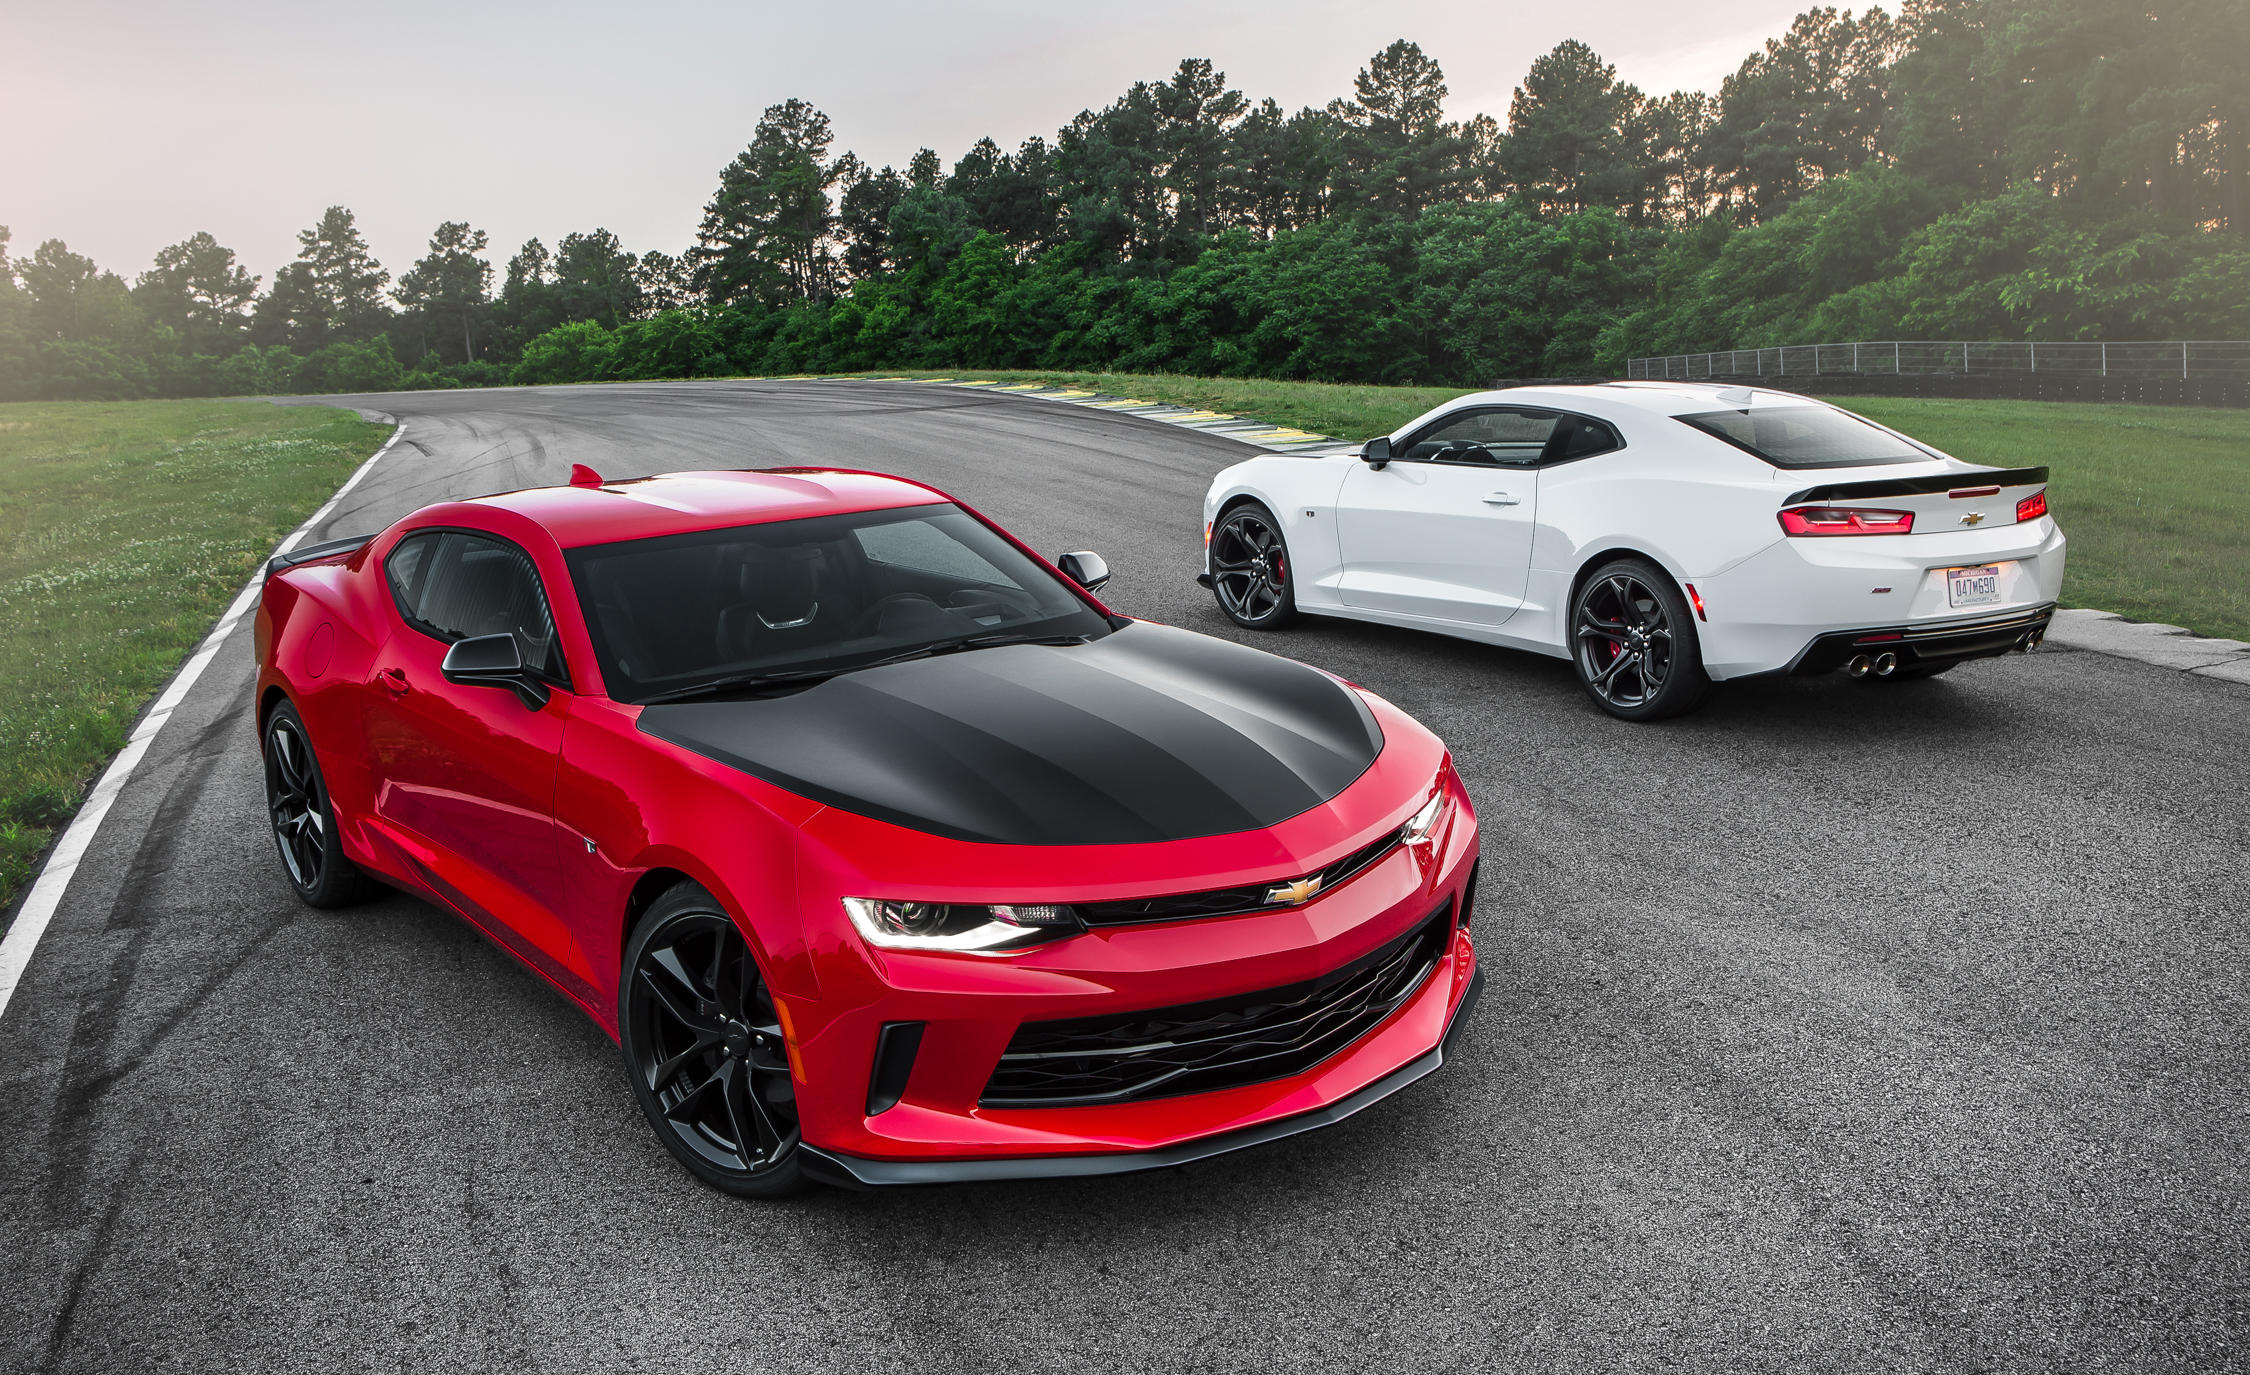 2017 Chevrolet Camaro V-6 1LE First Drive | Review | Car and Driver